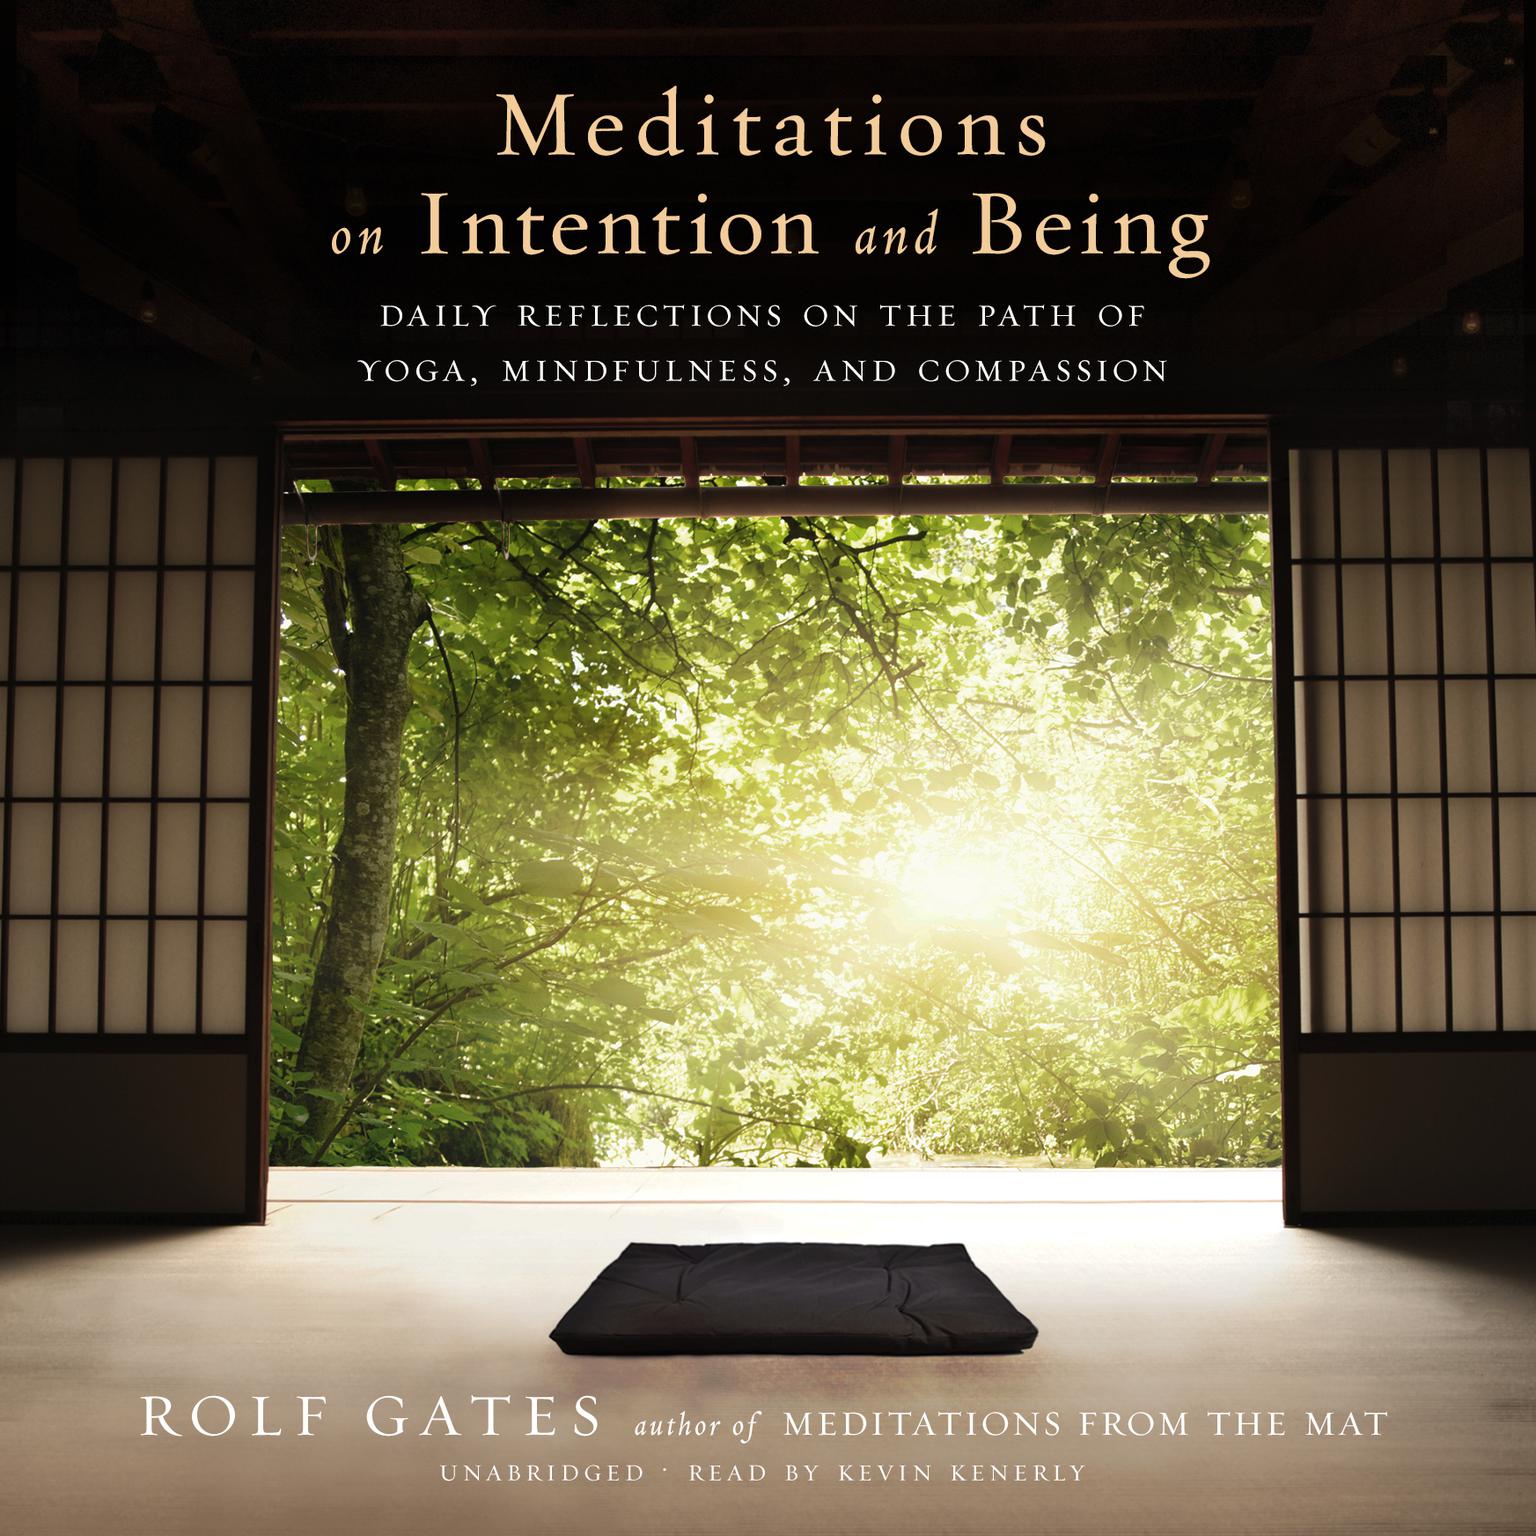 Meditations on Intention and Being: Daily Reflections on the Path of Yoga, Mindfulness, and Compassion Audiobook, by Rolf Gates